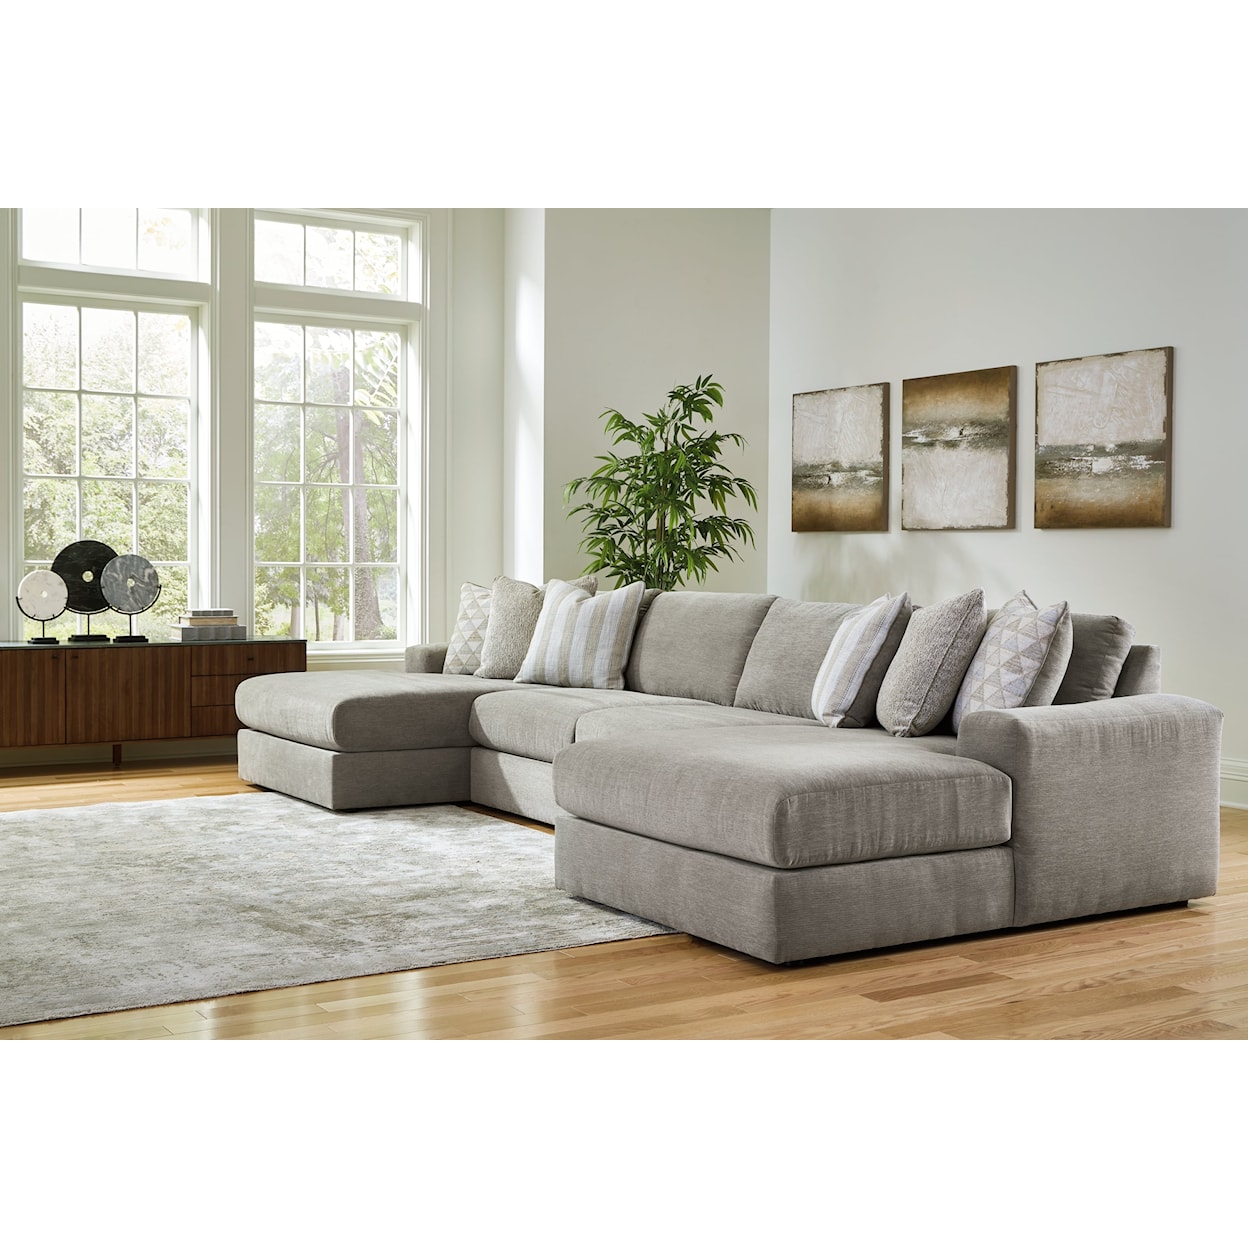 Michael Alan Select Avaliyah 4-Piece Double Chaise Sectional